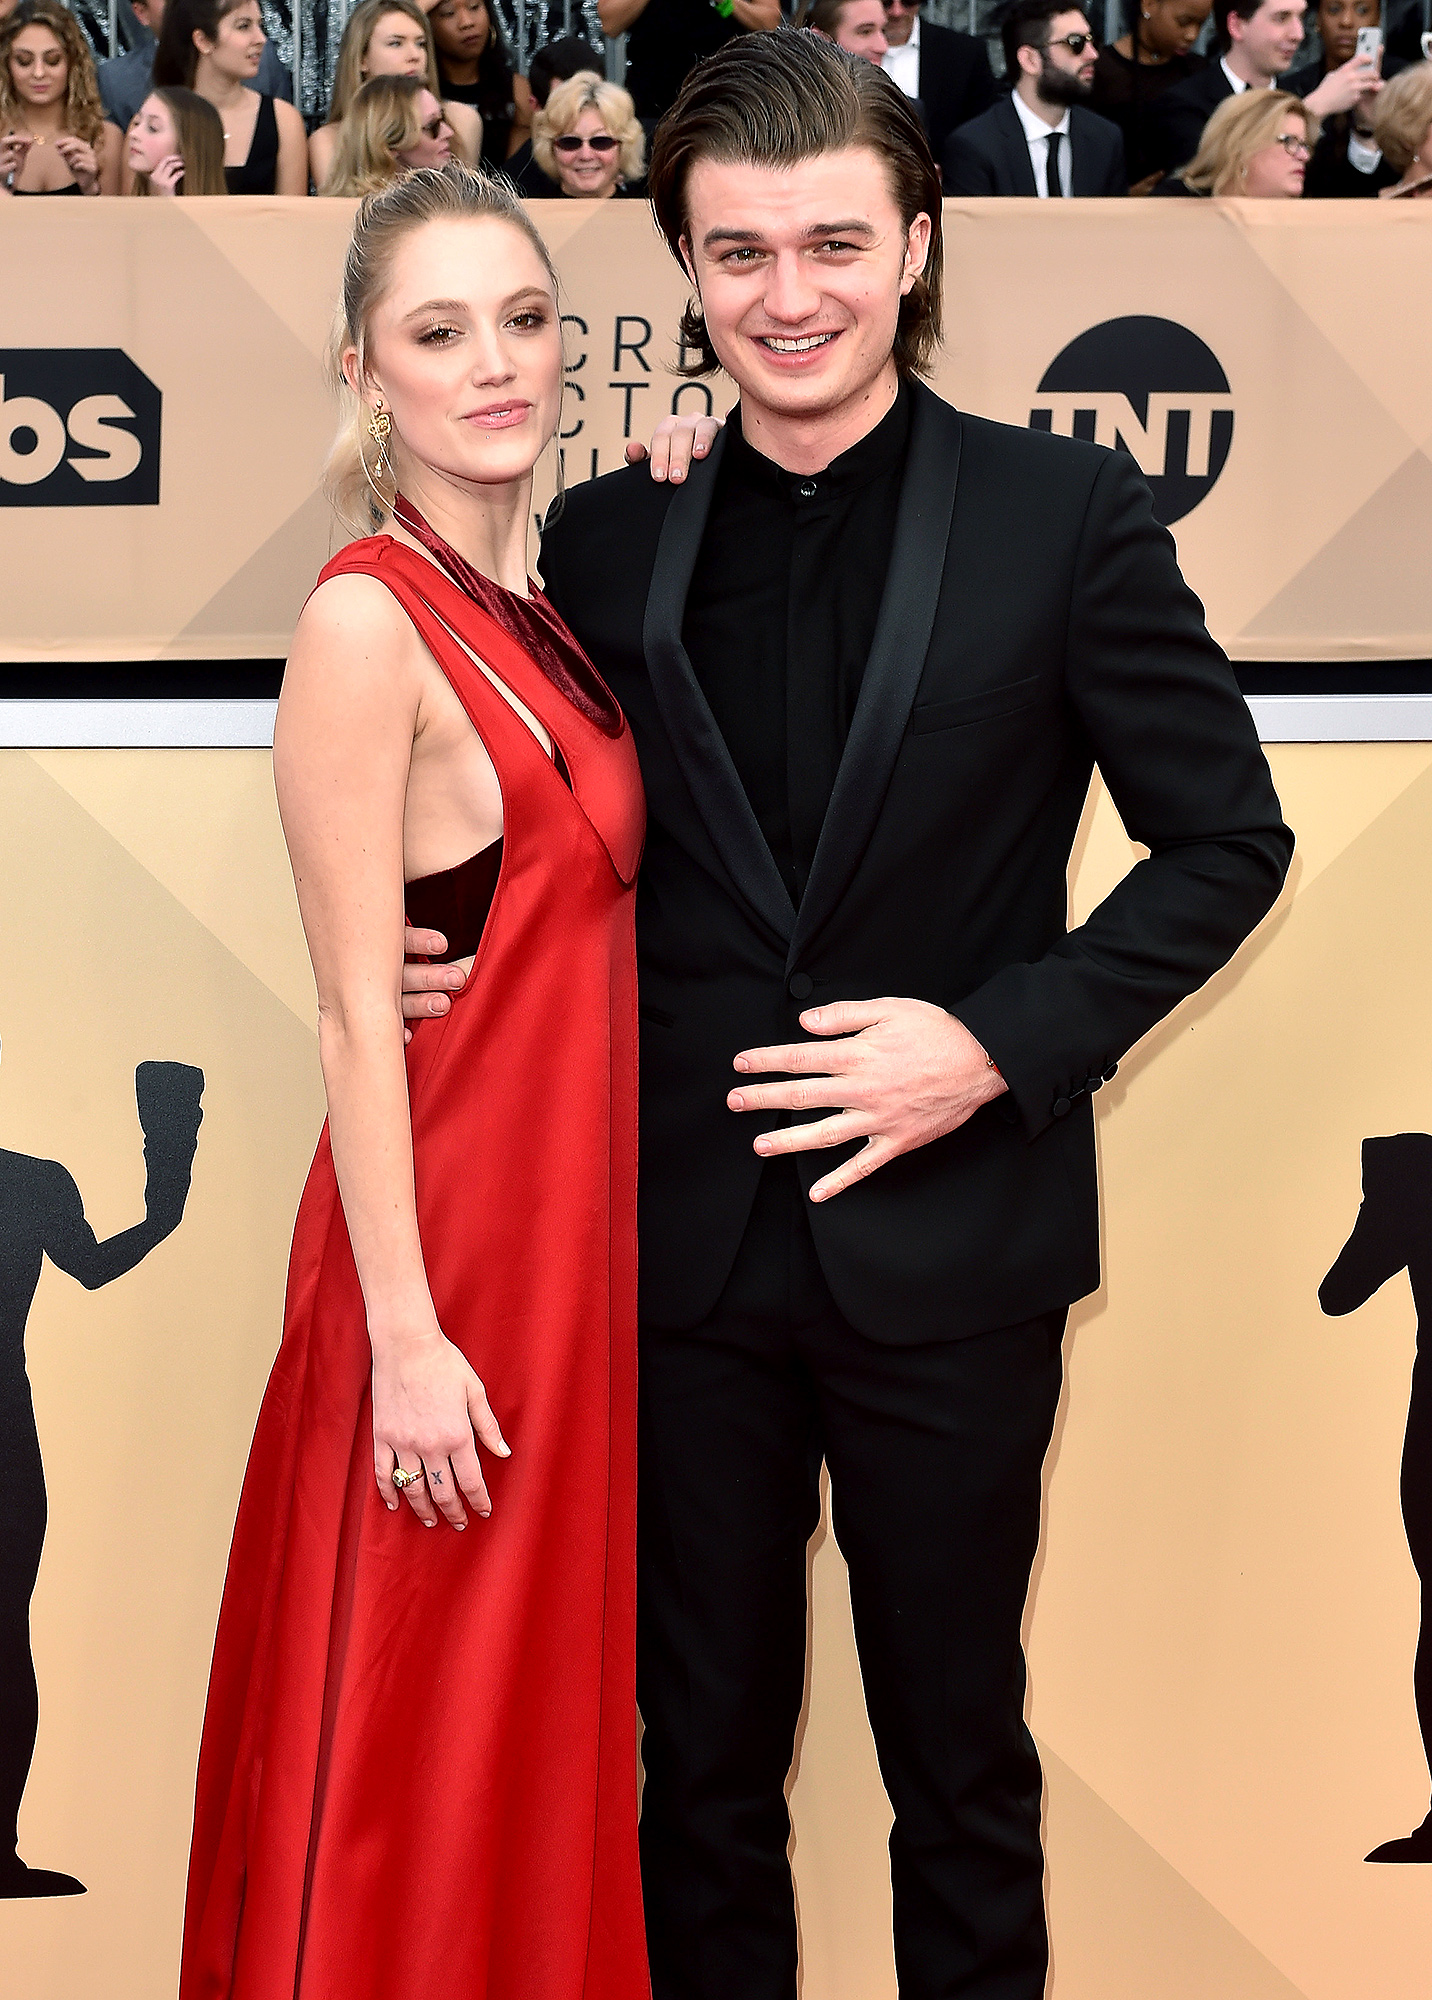 Joe Keery with his girlfriend, Maika Monroe, at the 24th Annual Screen Actors Guild Awards